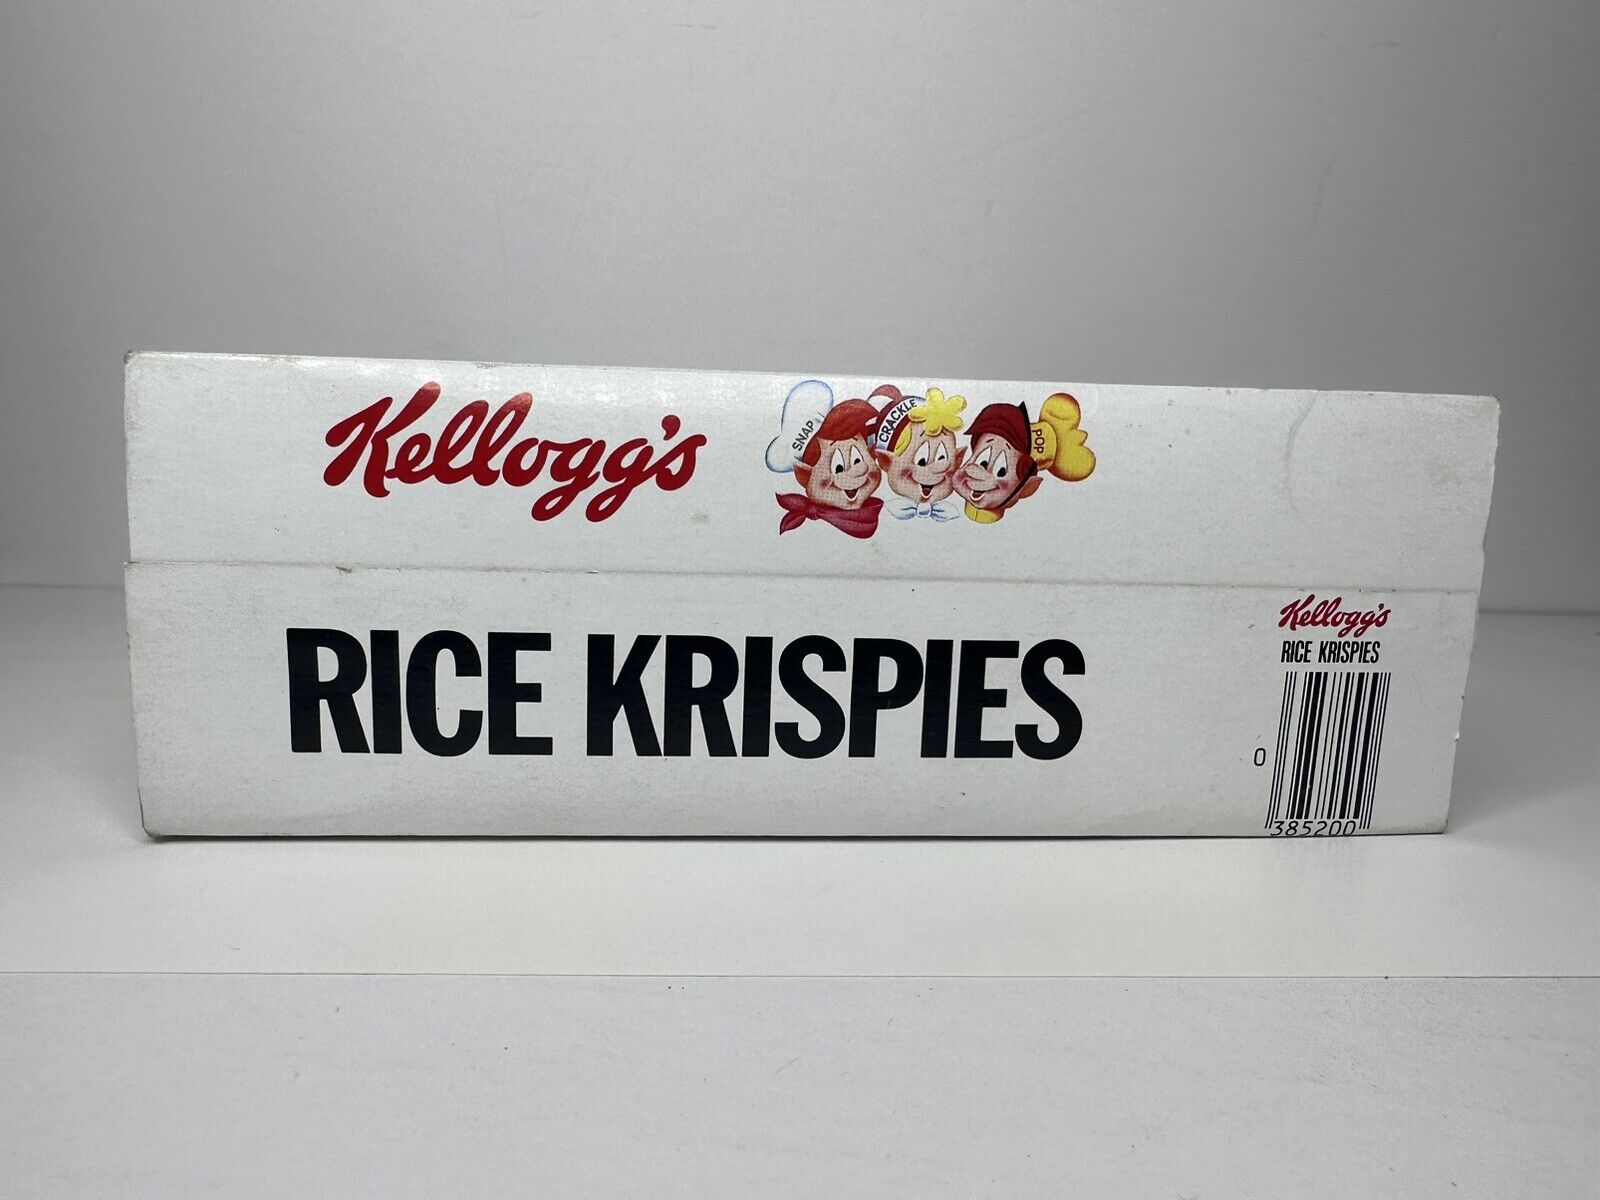 Rare Vintage 1981 Kellogg's Rice Krispies Cereal Box with Original Matchbox Truck Ad and Sweepstakes Coupons - TreasuTiques